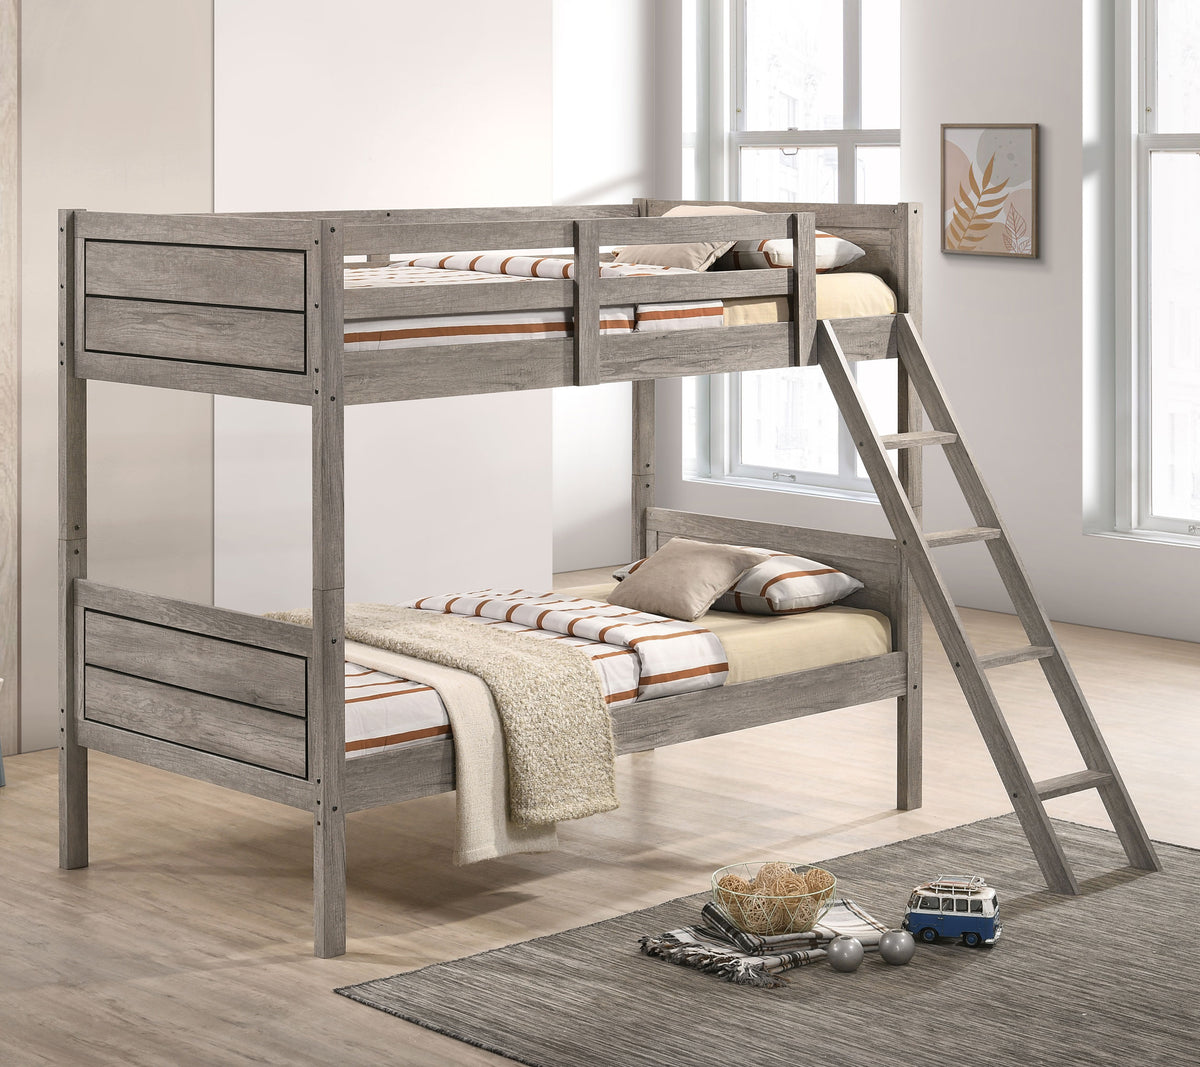 Ryder Bunk Bed Weathered Taupe  Half Price Furniture